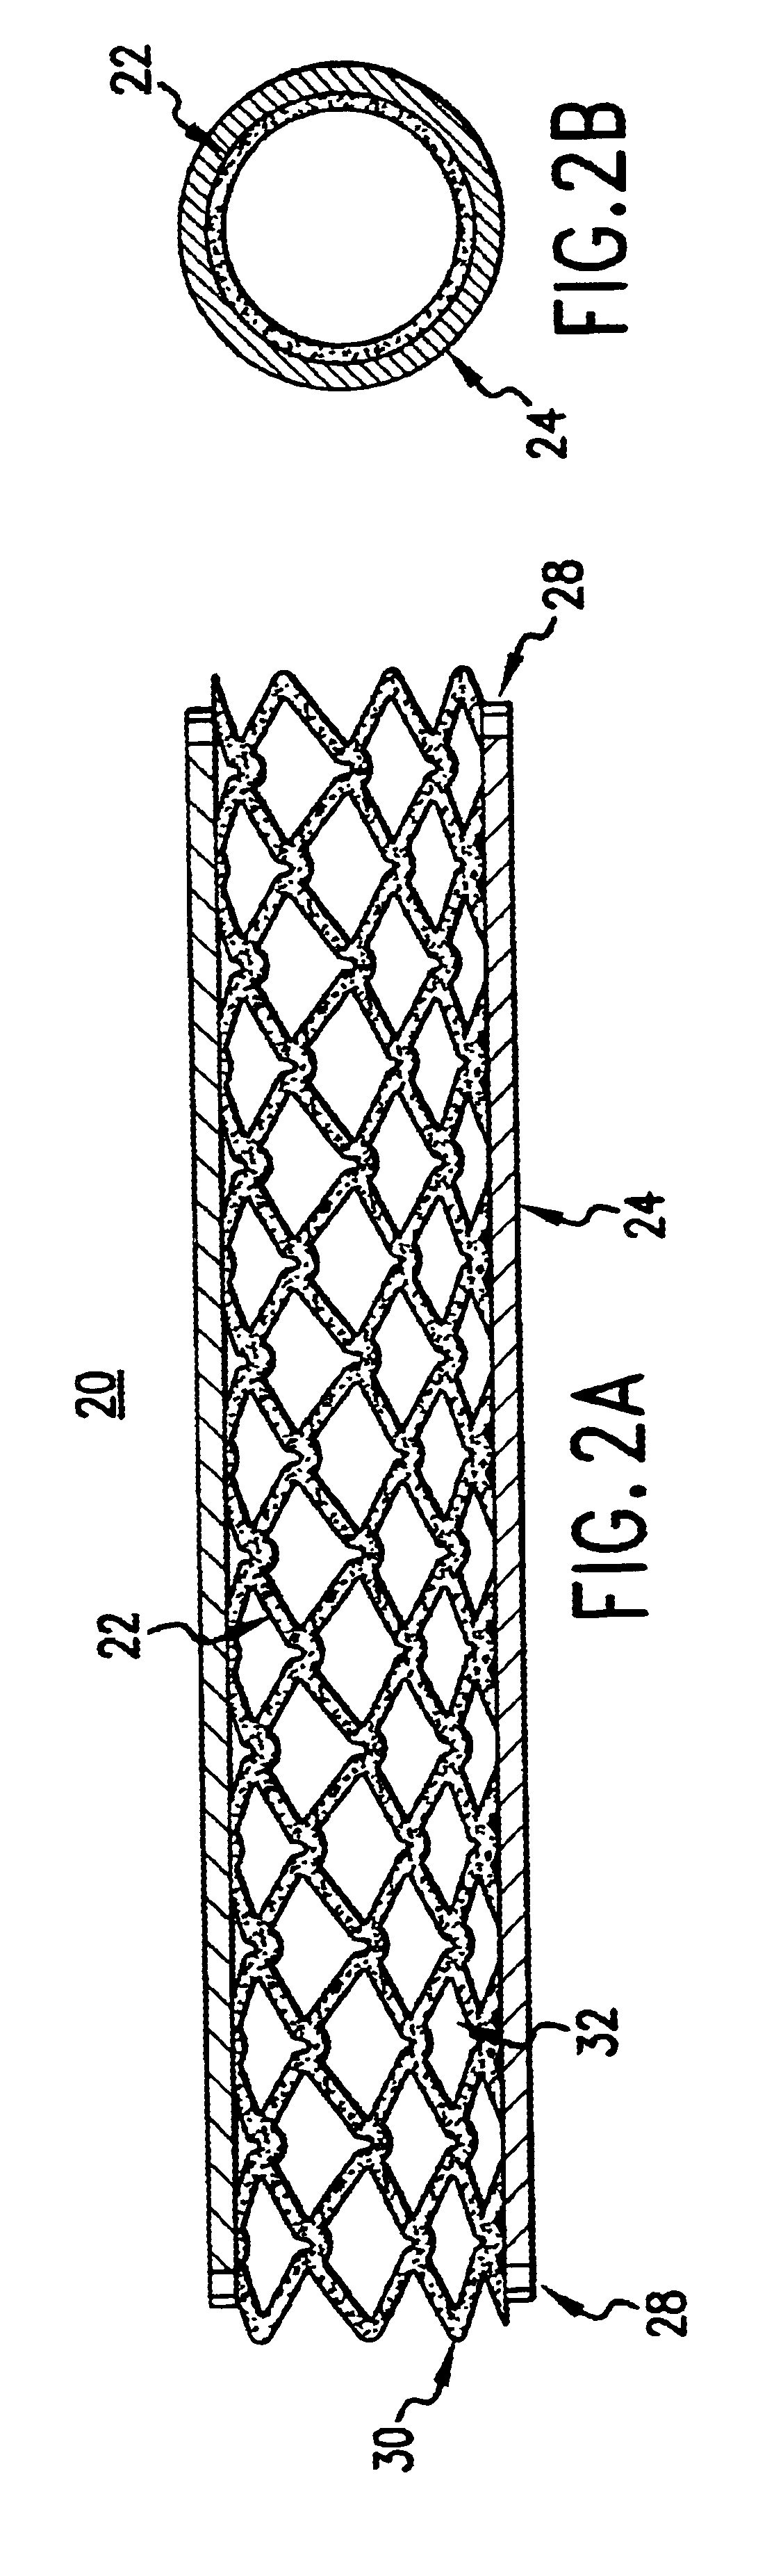 Stent having cover with drug delivery capability